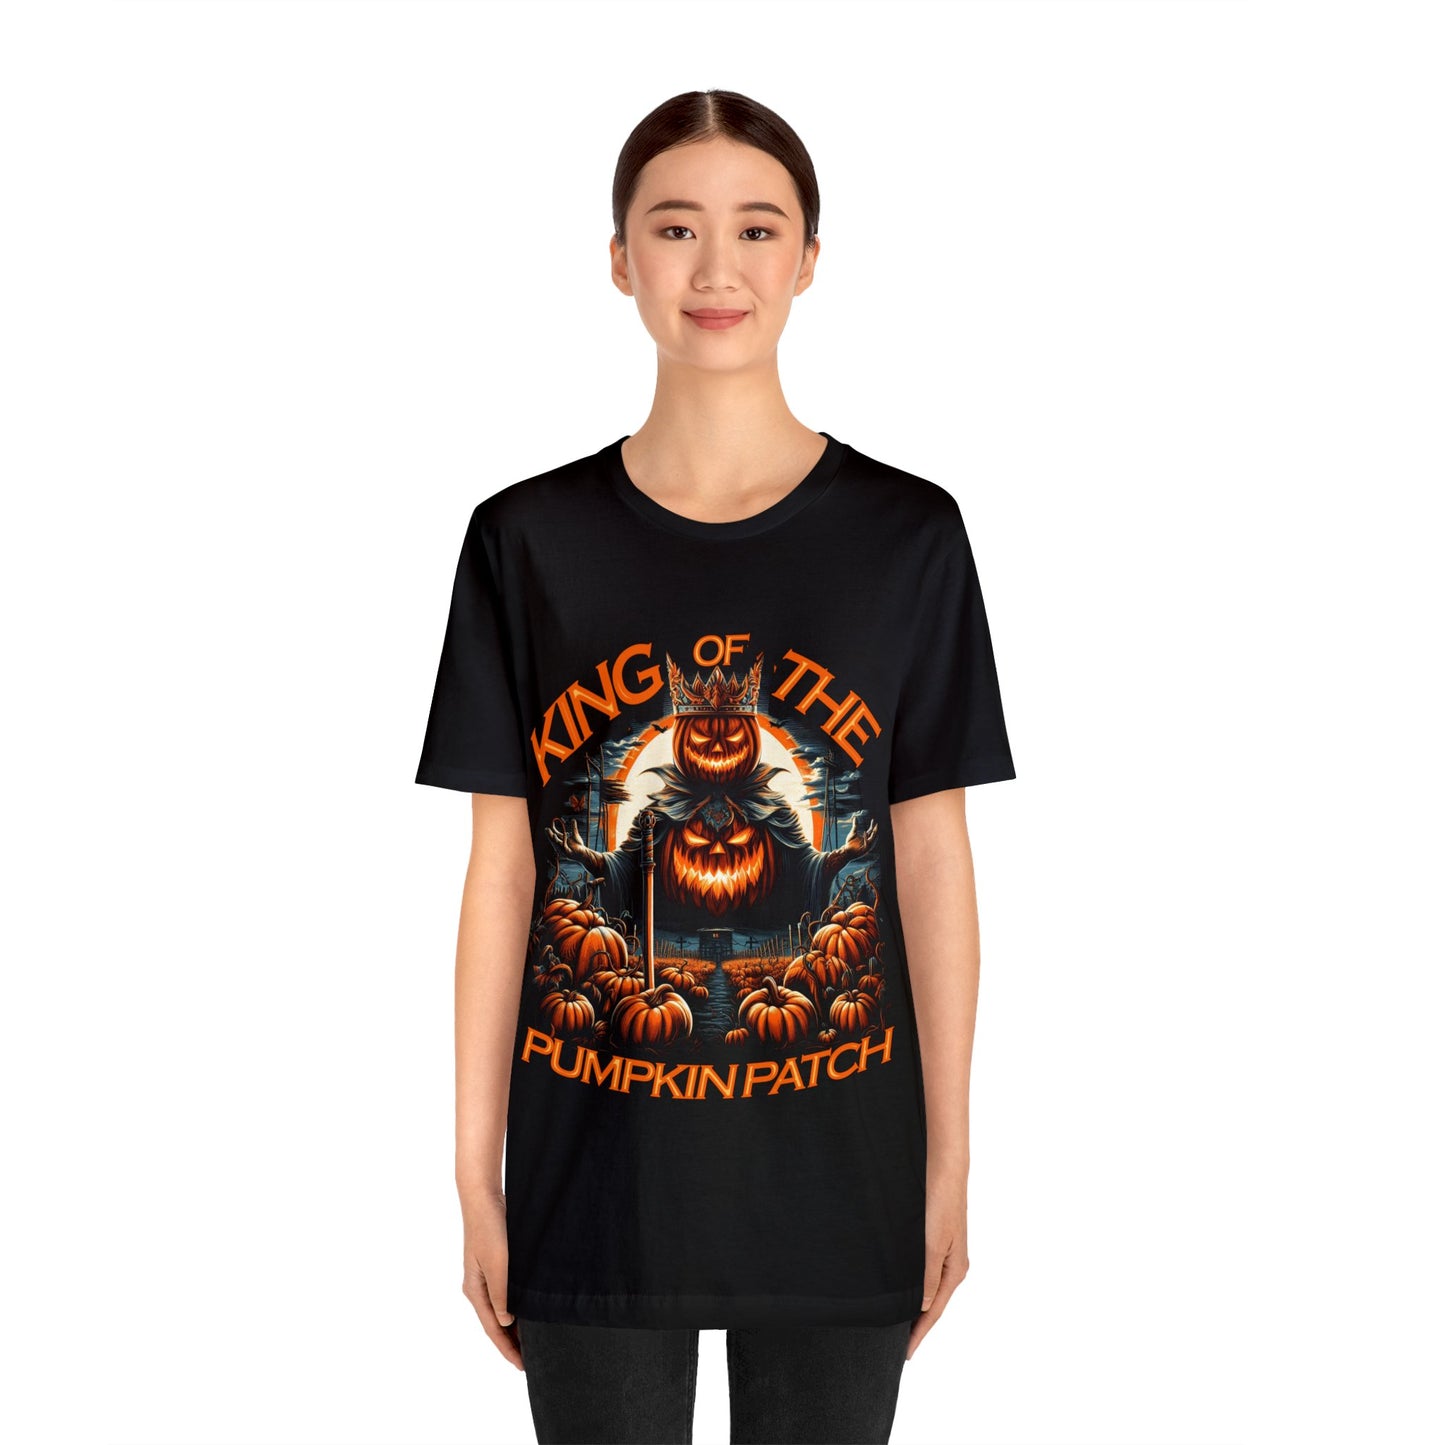 King of the Pumpkin Patch T-Shirt - Ruling the Halloween Realm